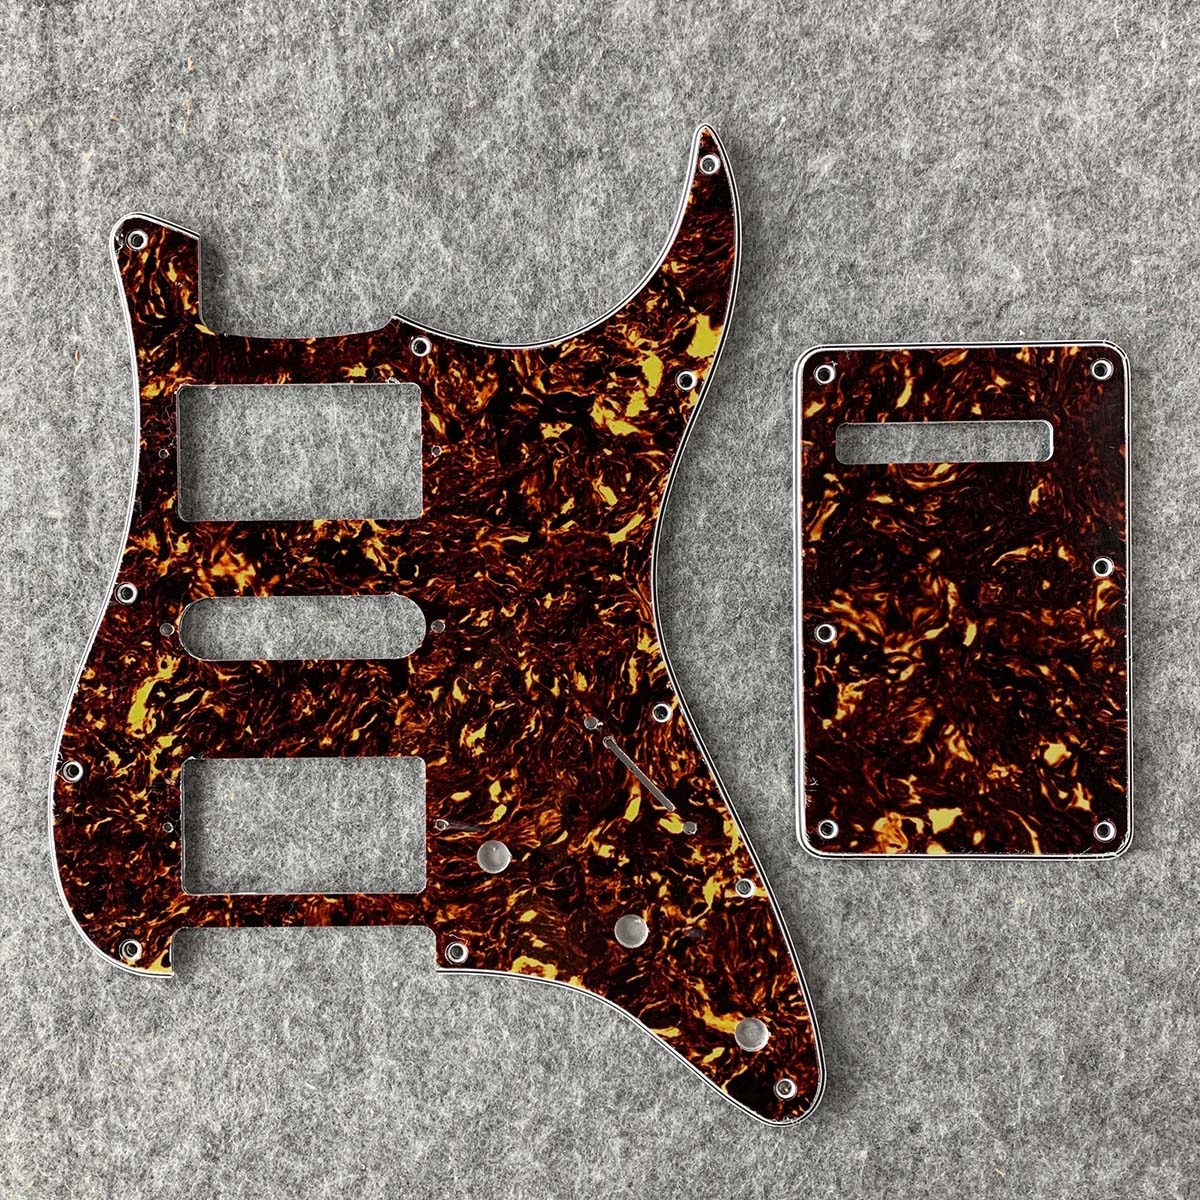 FLEOR Set of 11 Hole Strat HSH Electric Guitar Pickguard Back Plate with Screws,11 Colors Available